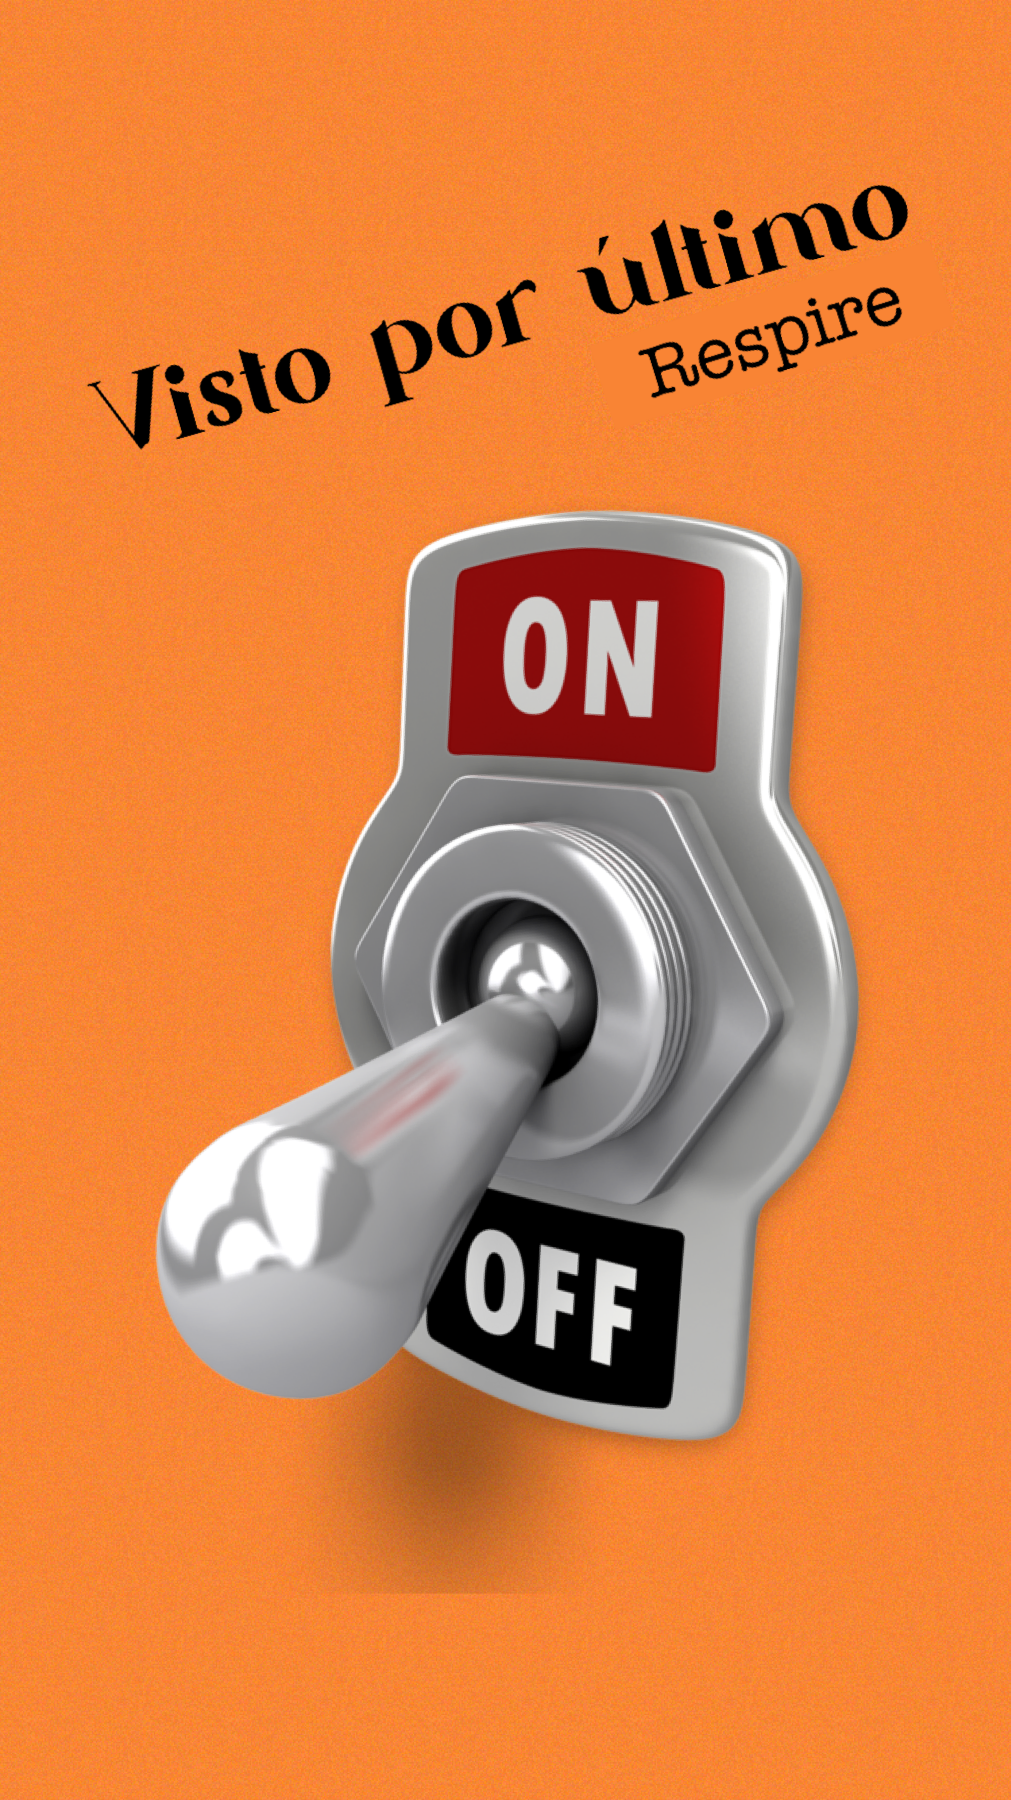 Turn off from Internet. It is helpful!
From Brazil by @mogirard